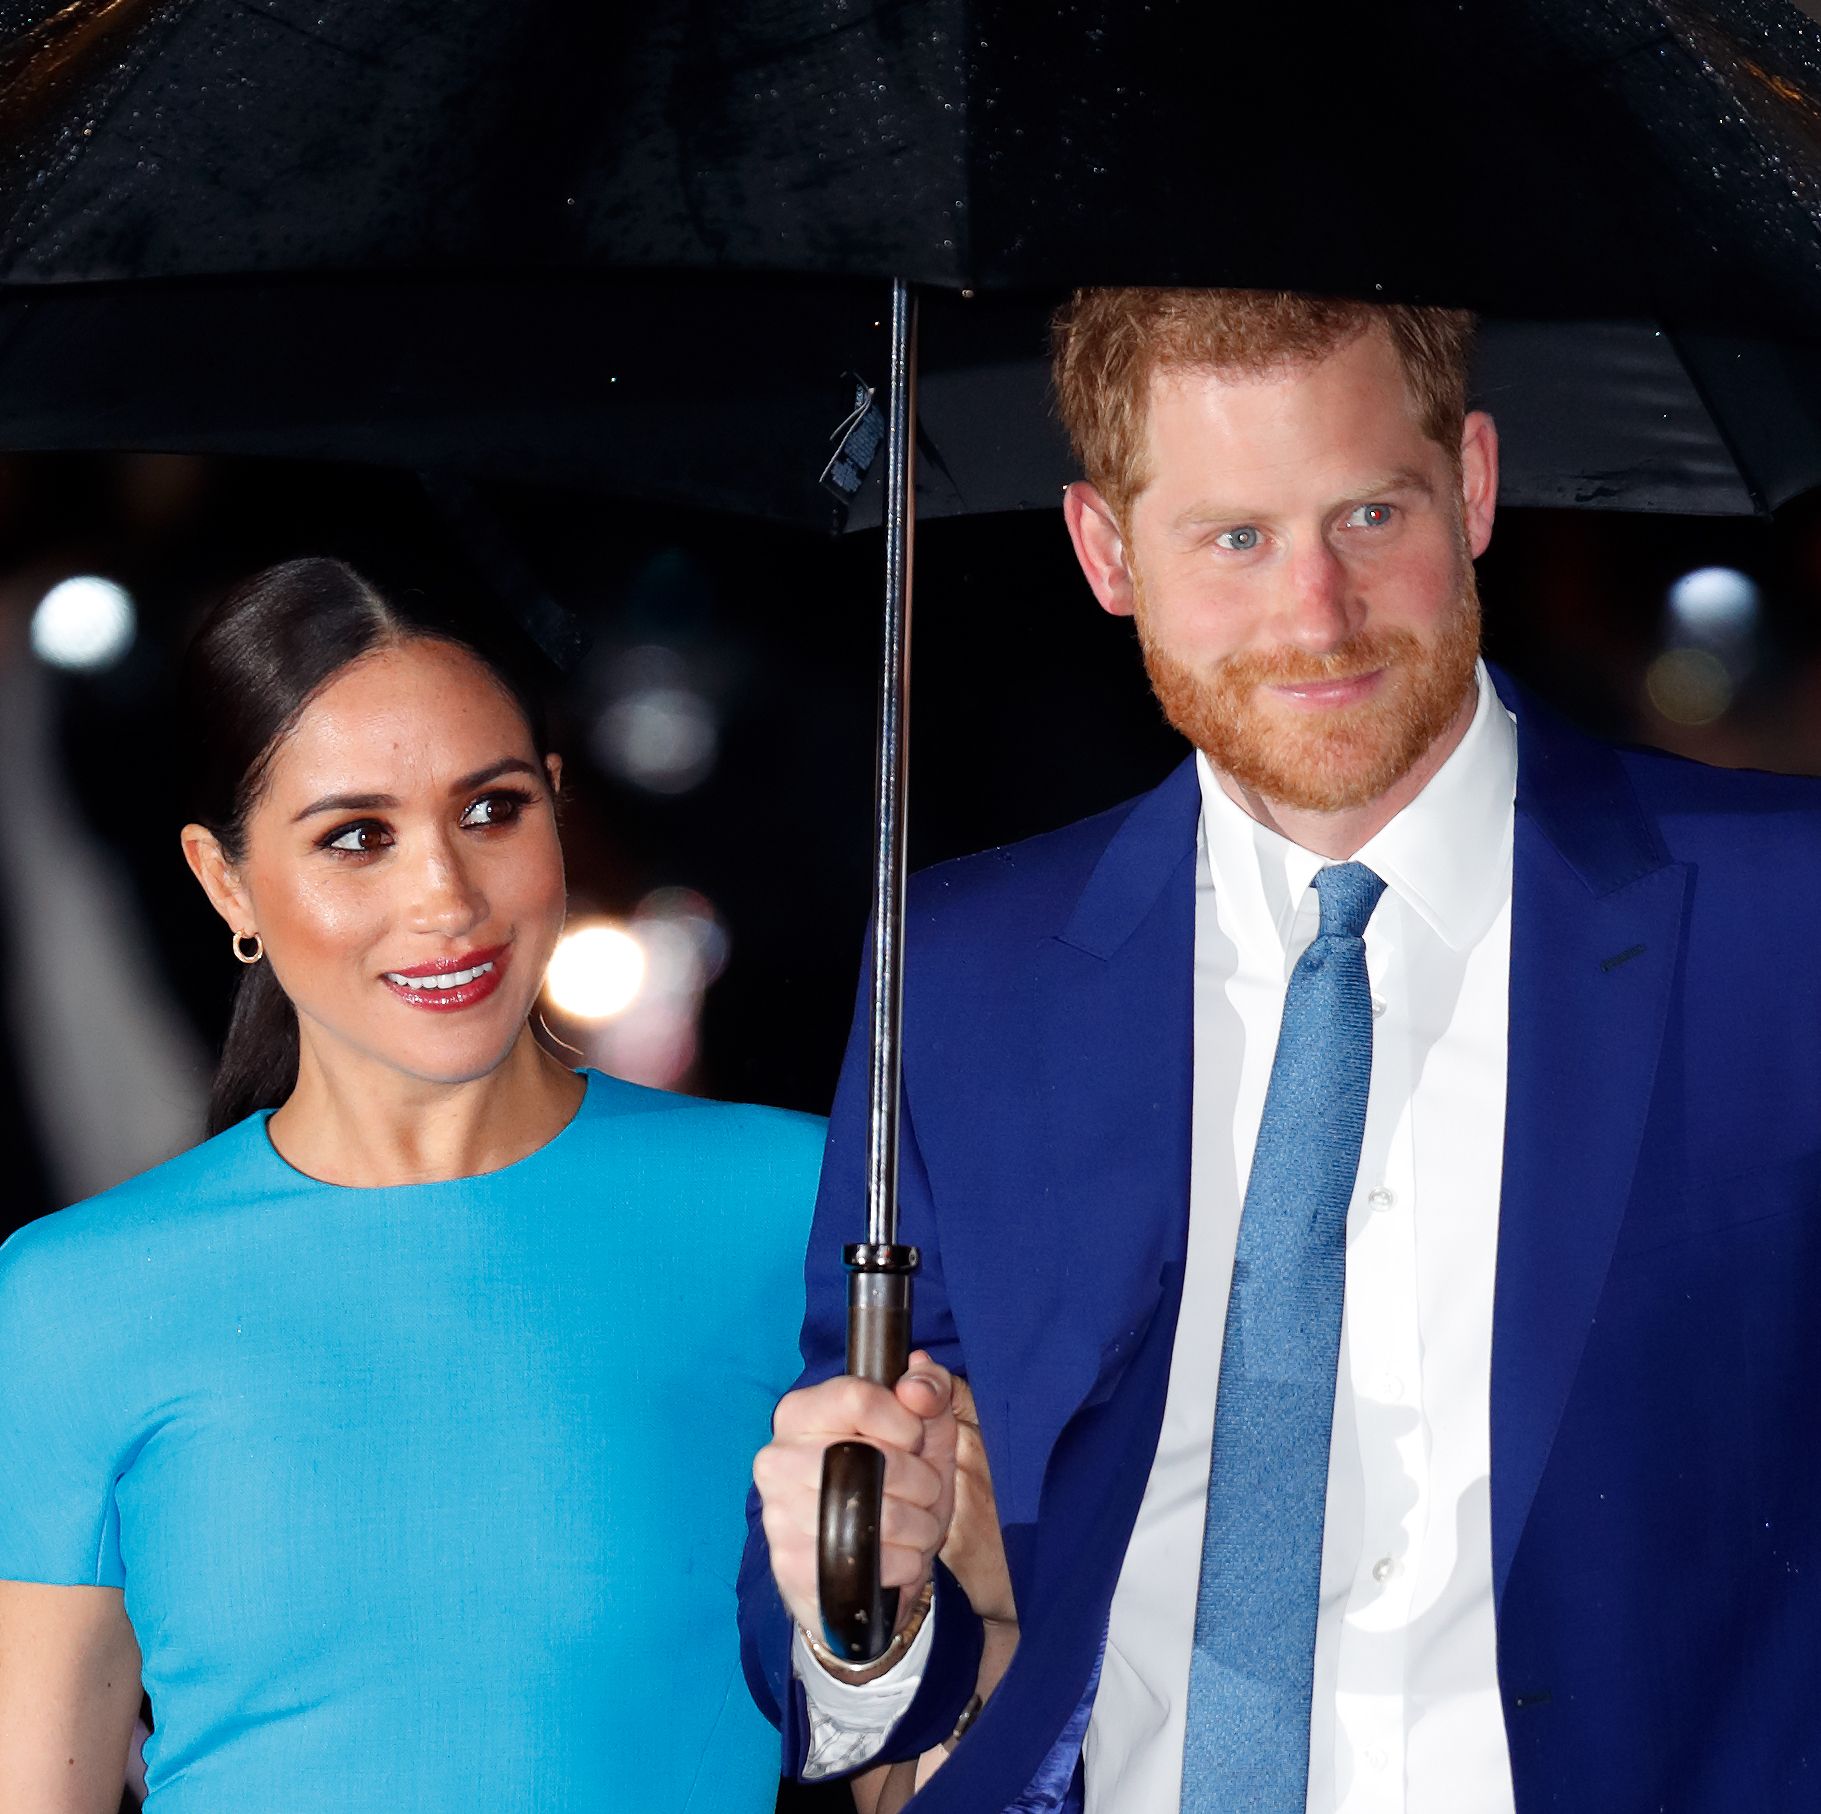 There's Speculation That the Sussexes Could Move Into Windsor Castle If They Return to the U.K.